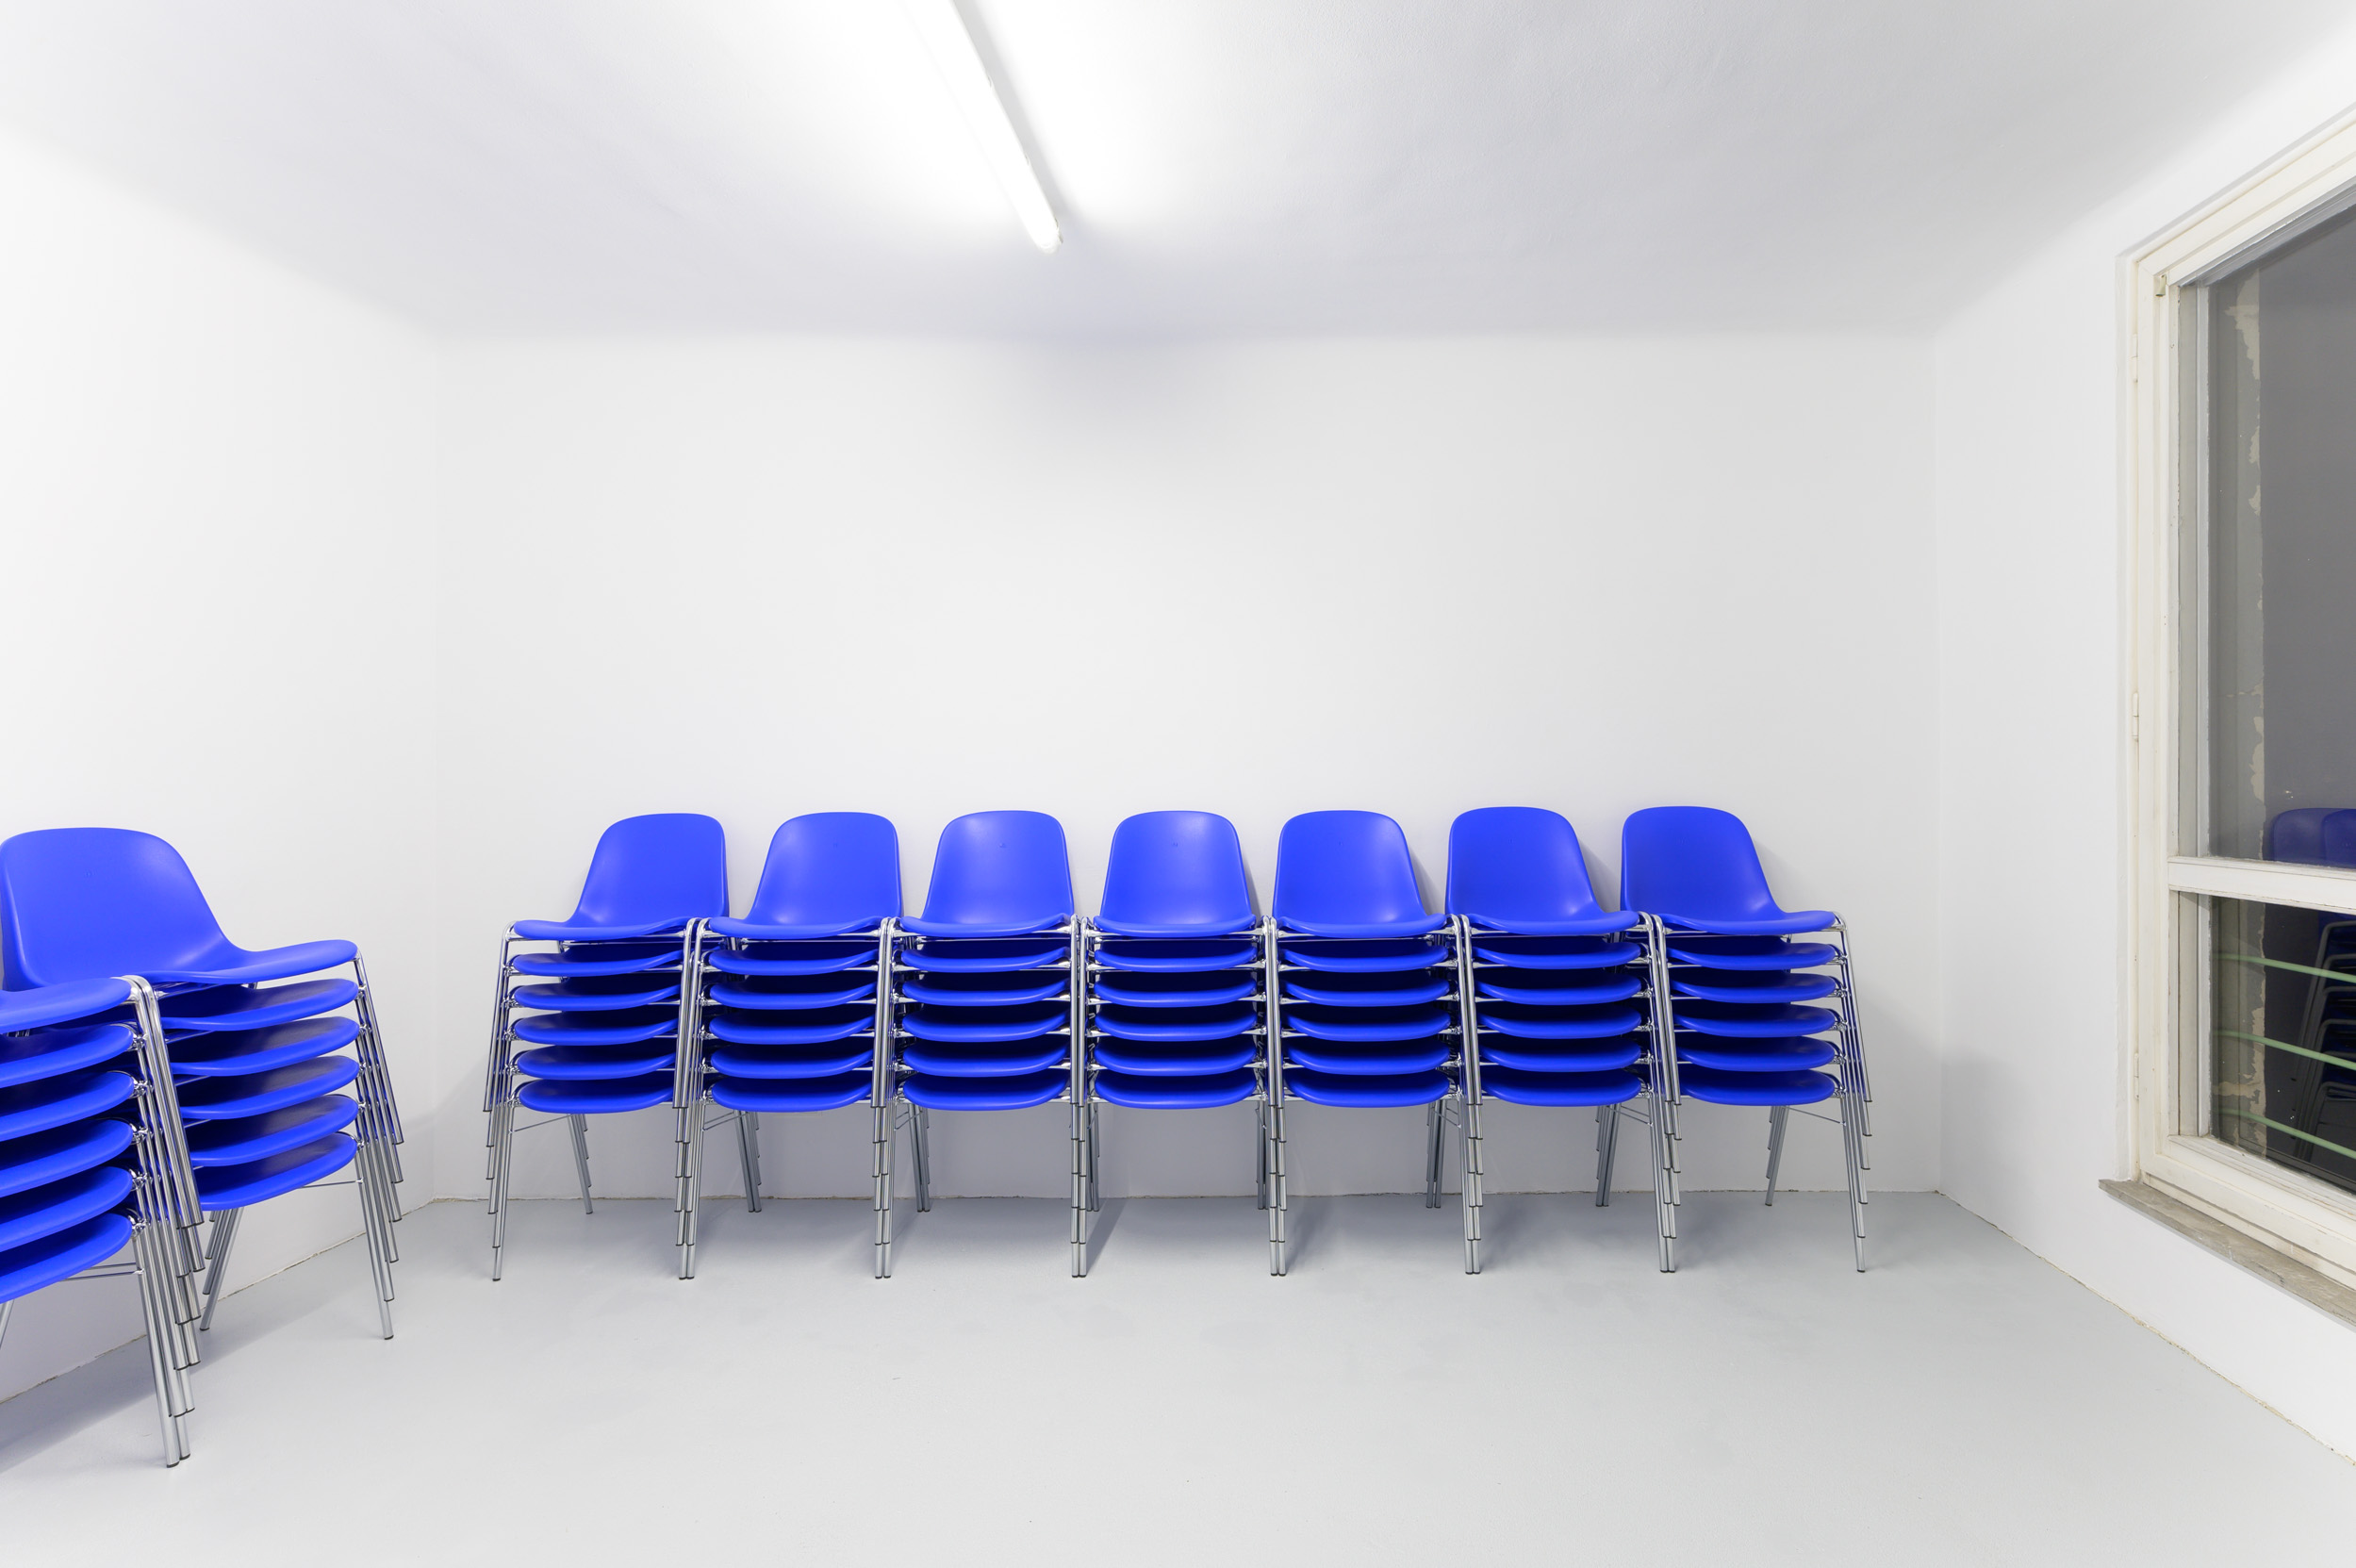 Edgar Lessig – I thought I wanted to be there, but I wasn't sure (Chairs), 2021 at Stiege 13, Vienna